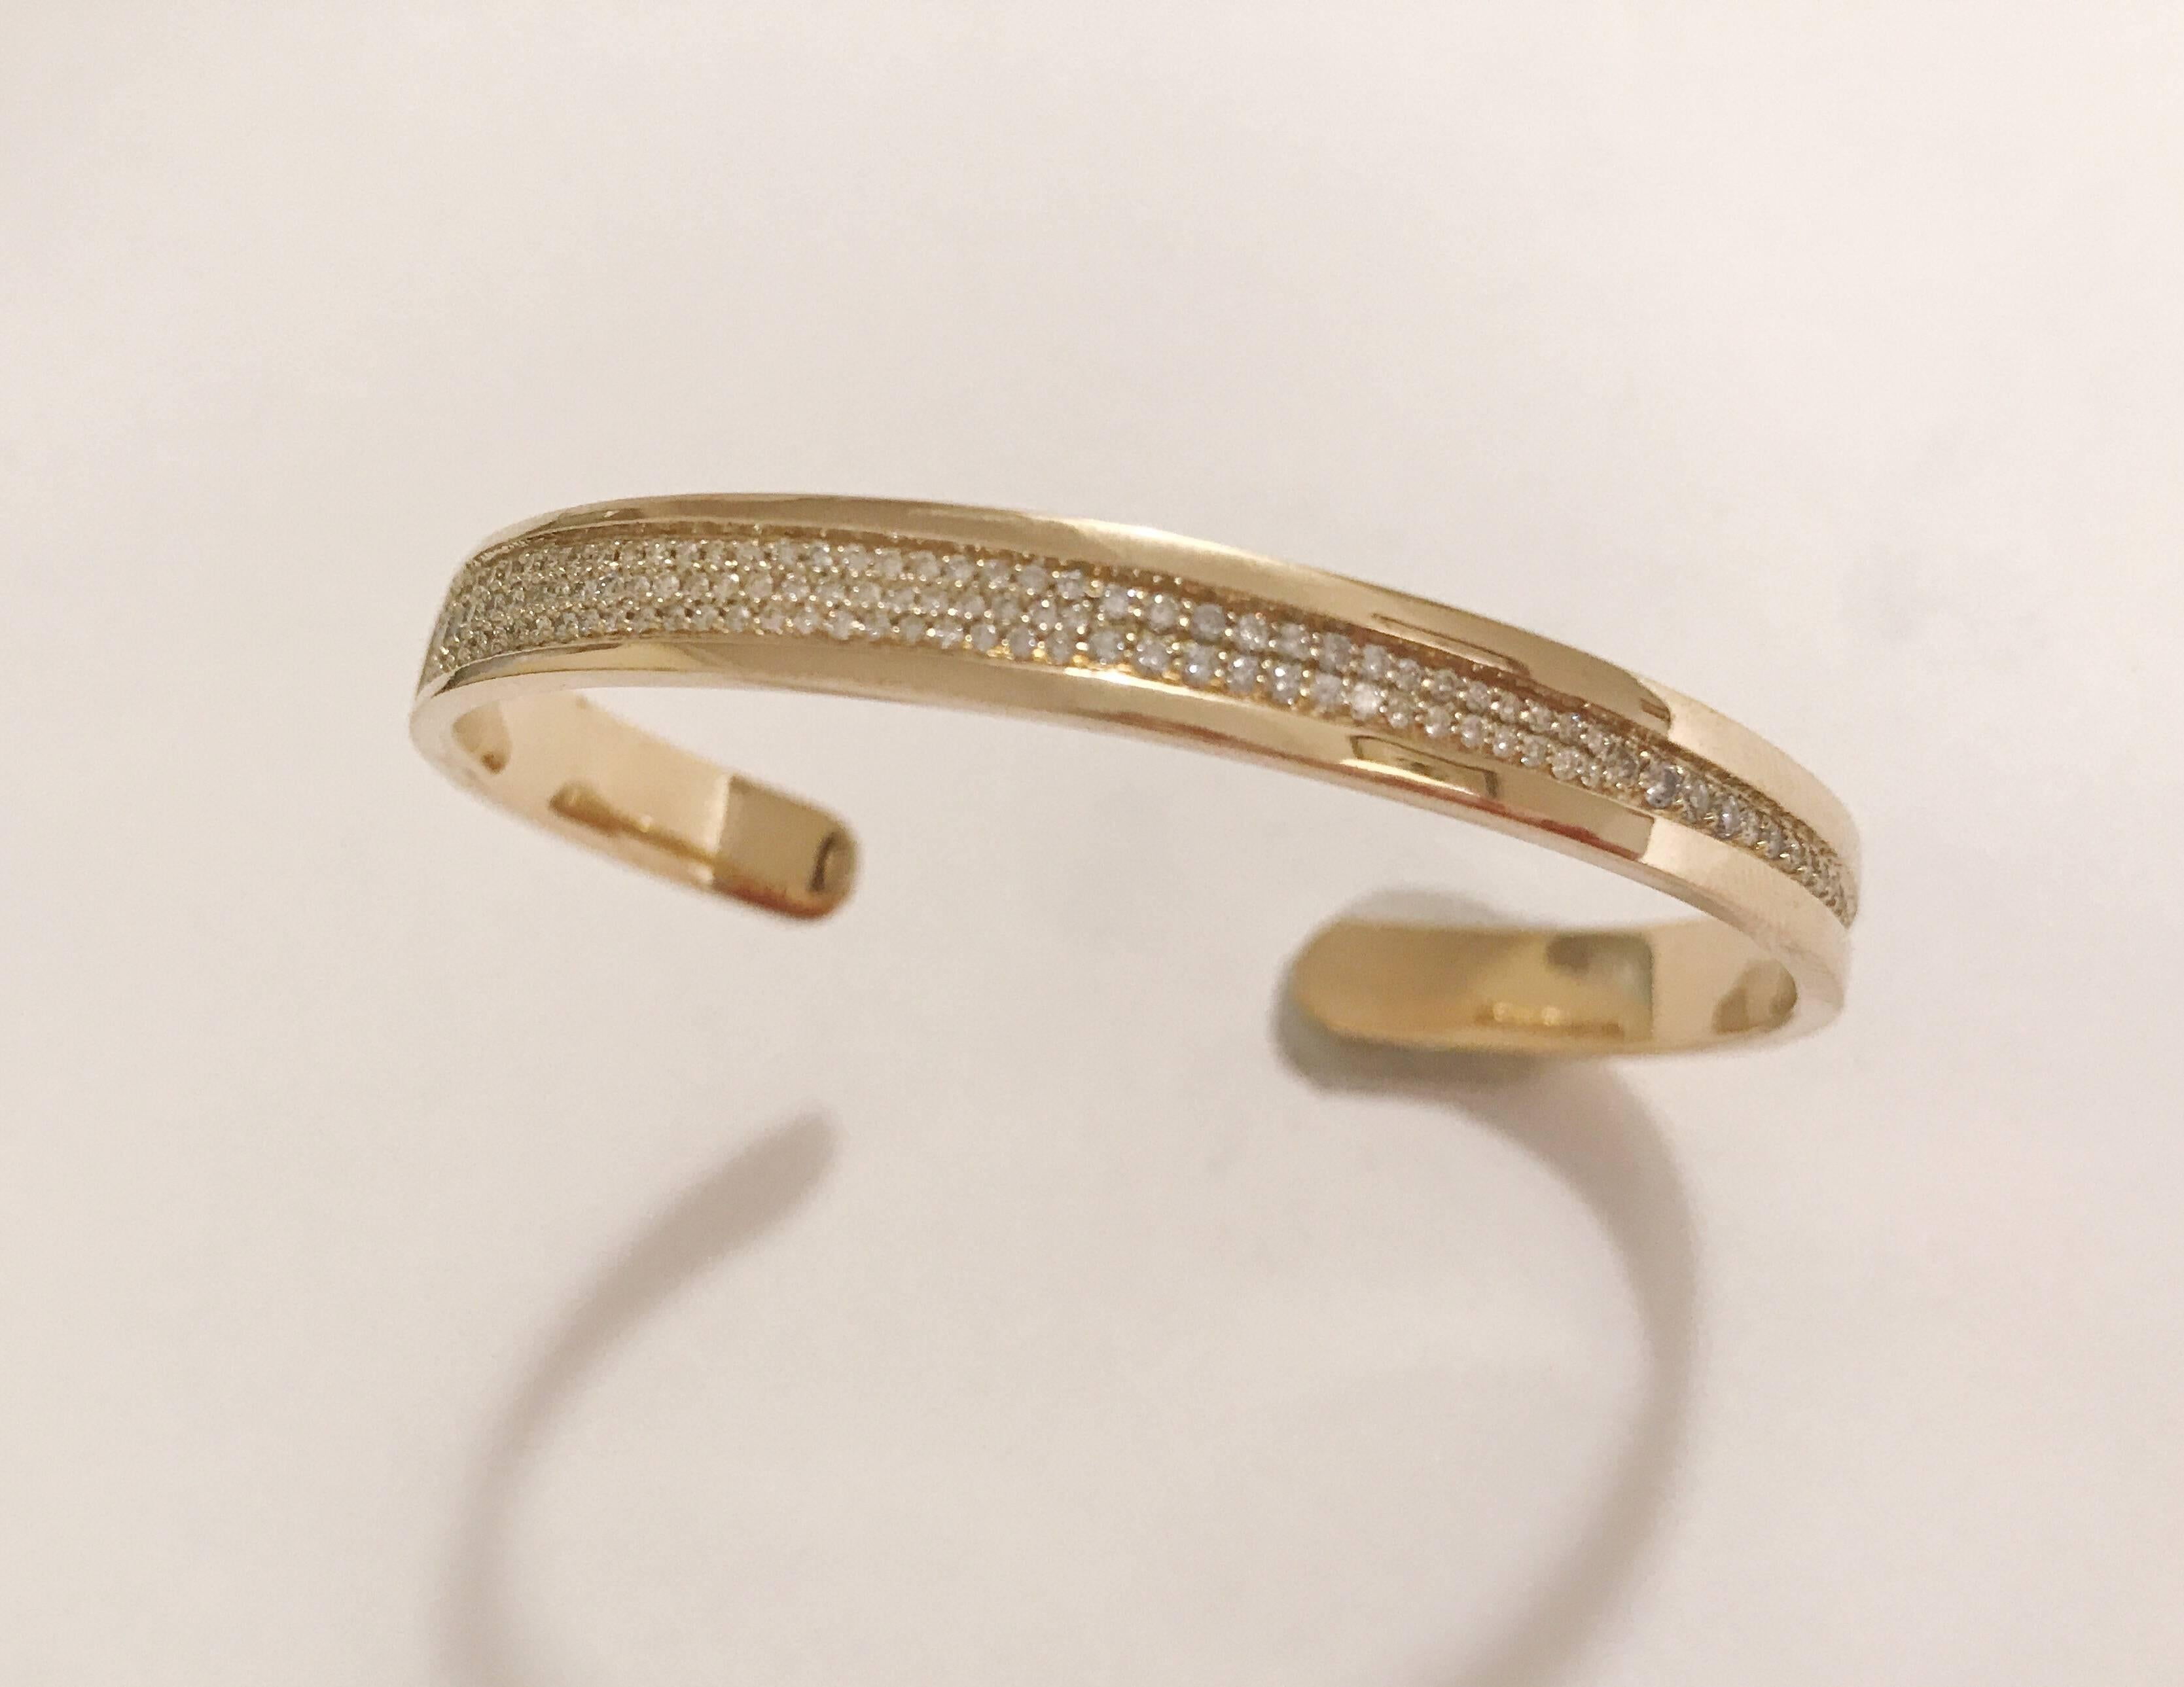 18kt Yellow Gold Granulated Diamond Cuff Bracelet is ~ approximately 1.00 cts. 

This cuff bracelet can be made in any color gold and fits to all wrist sizes. 

Please contact us with any inquiries you may have. 

Best, 
Christina Addison